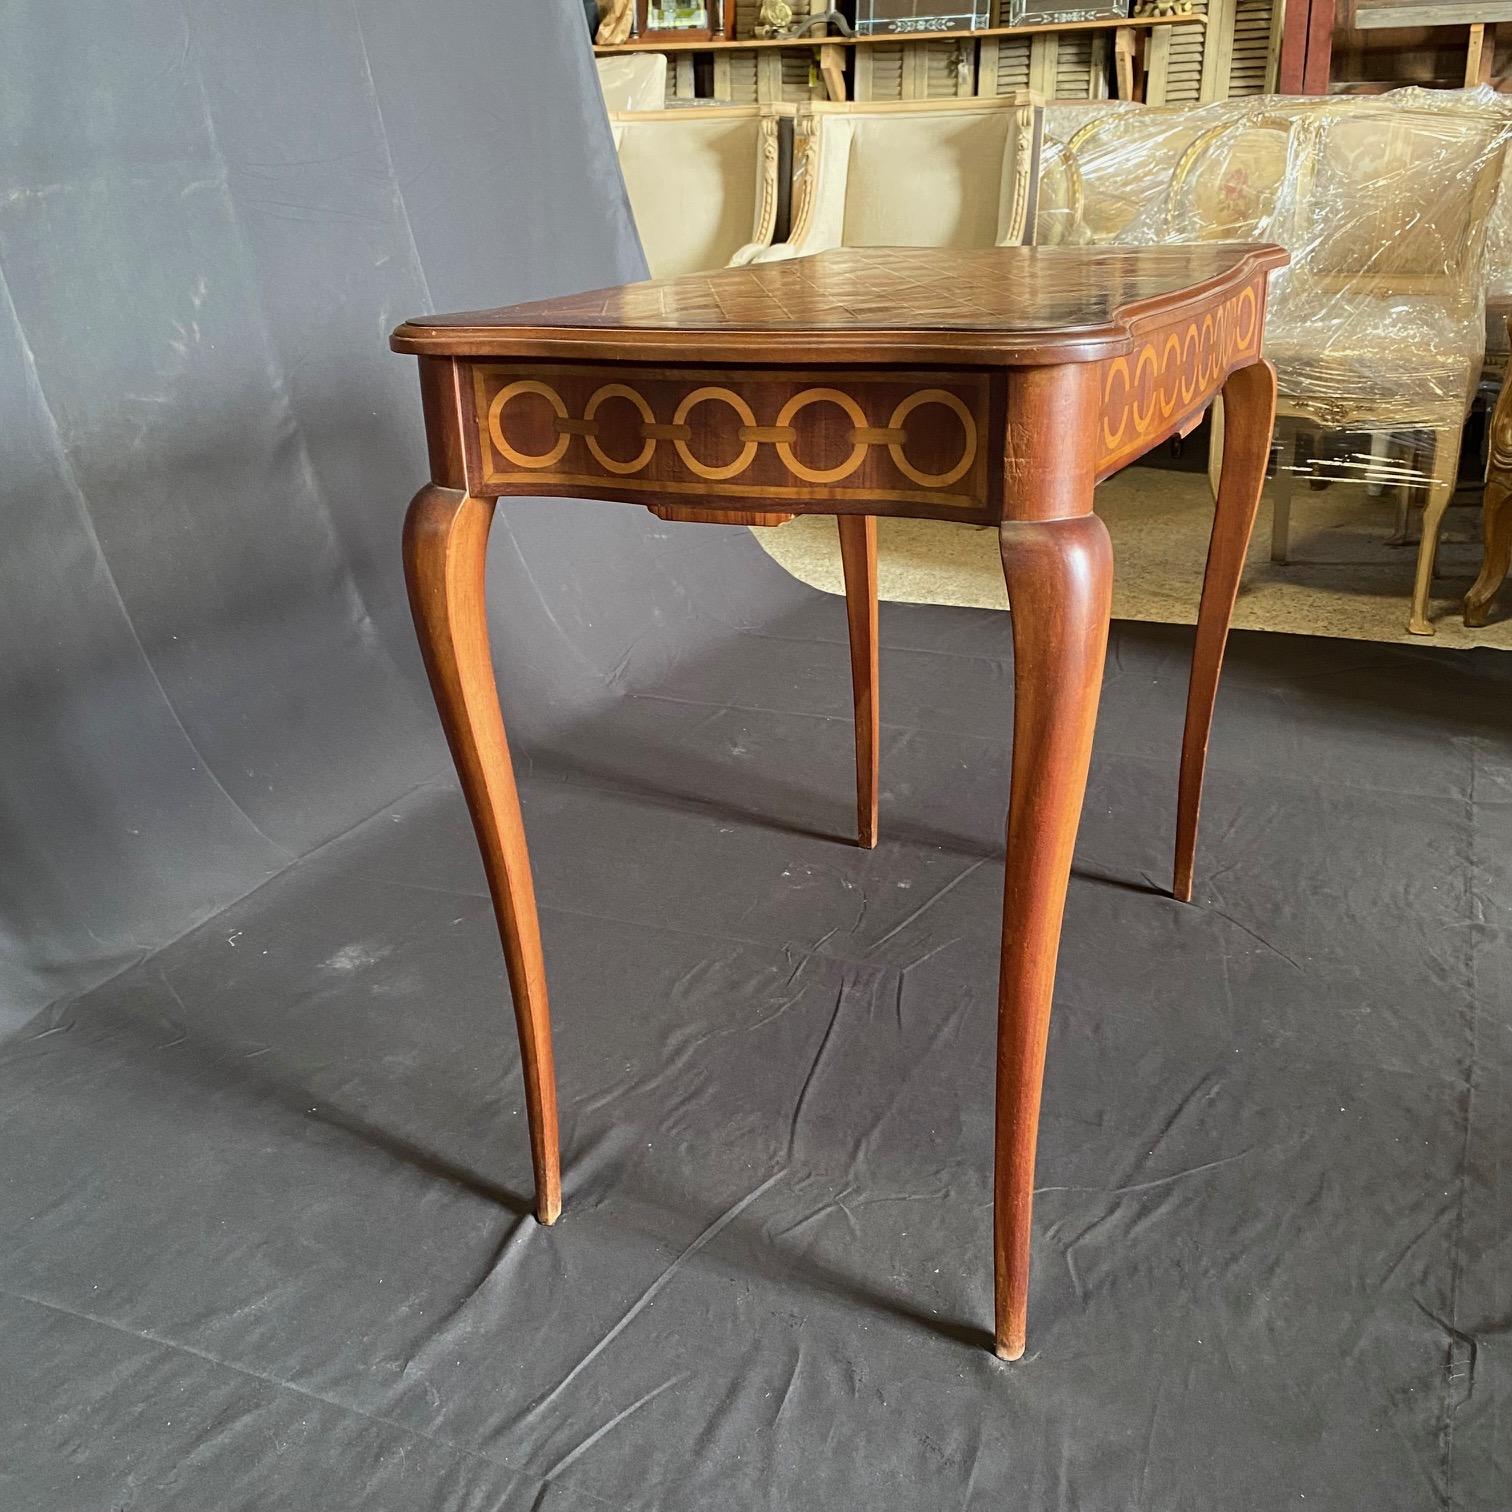  French Directoire Inlaid Marquetry Side Table or Desk with Meticulous Inlay For Sale 2